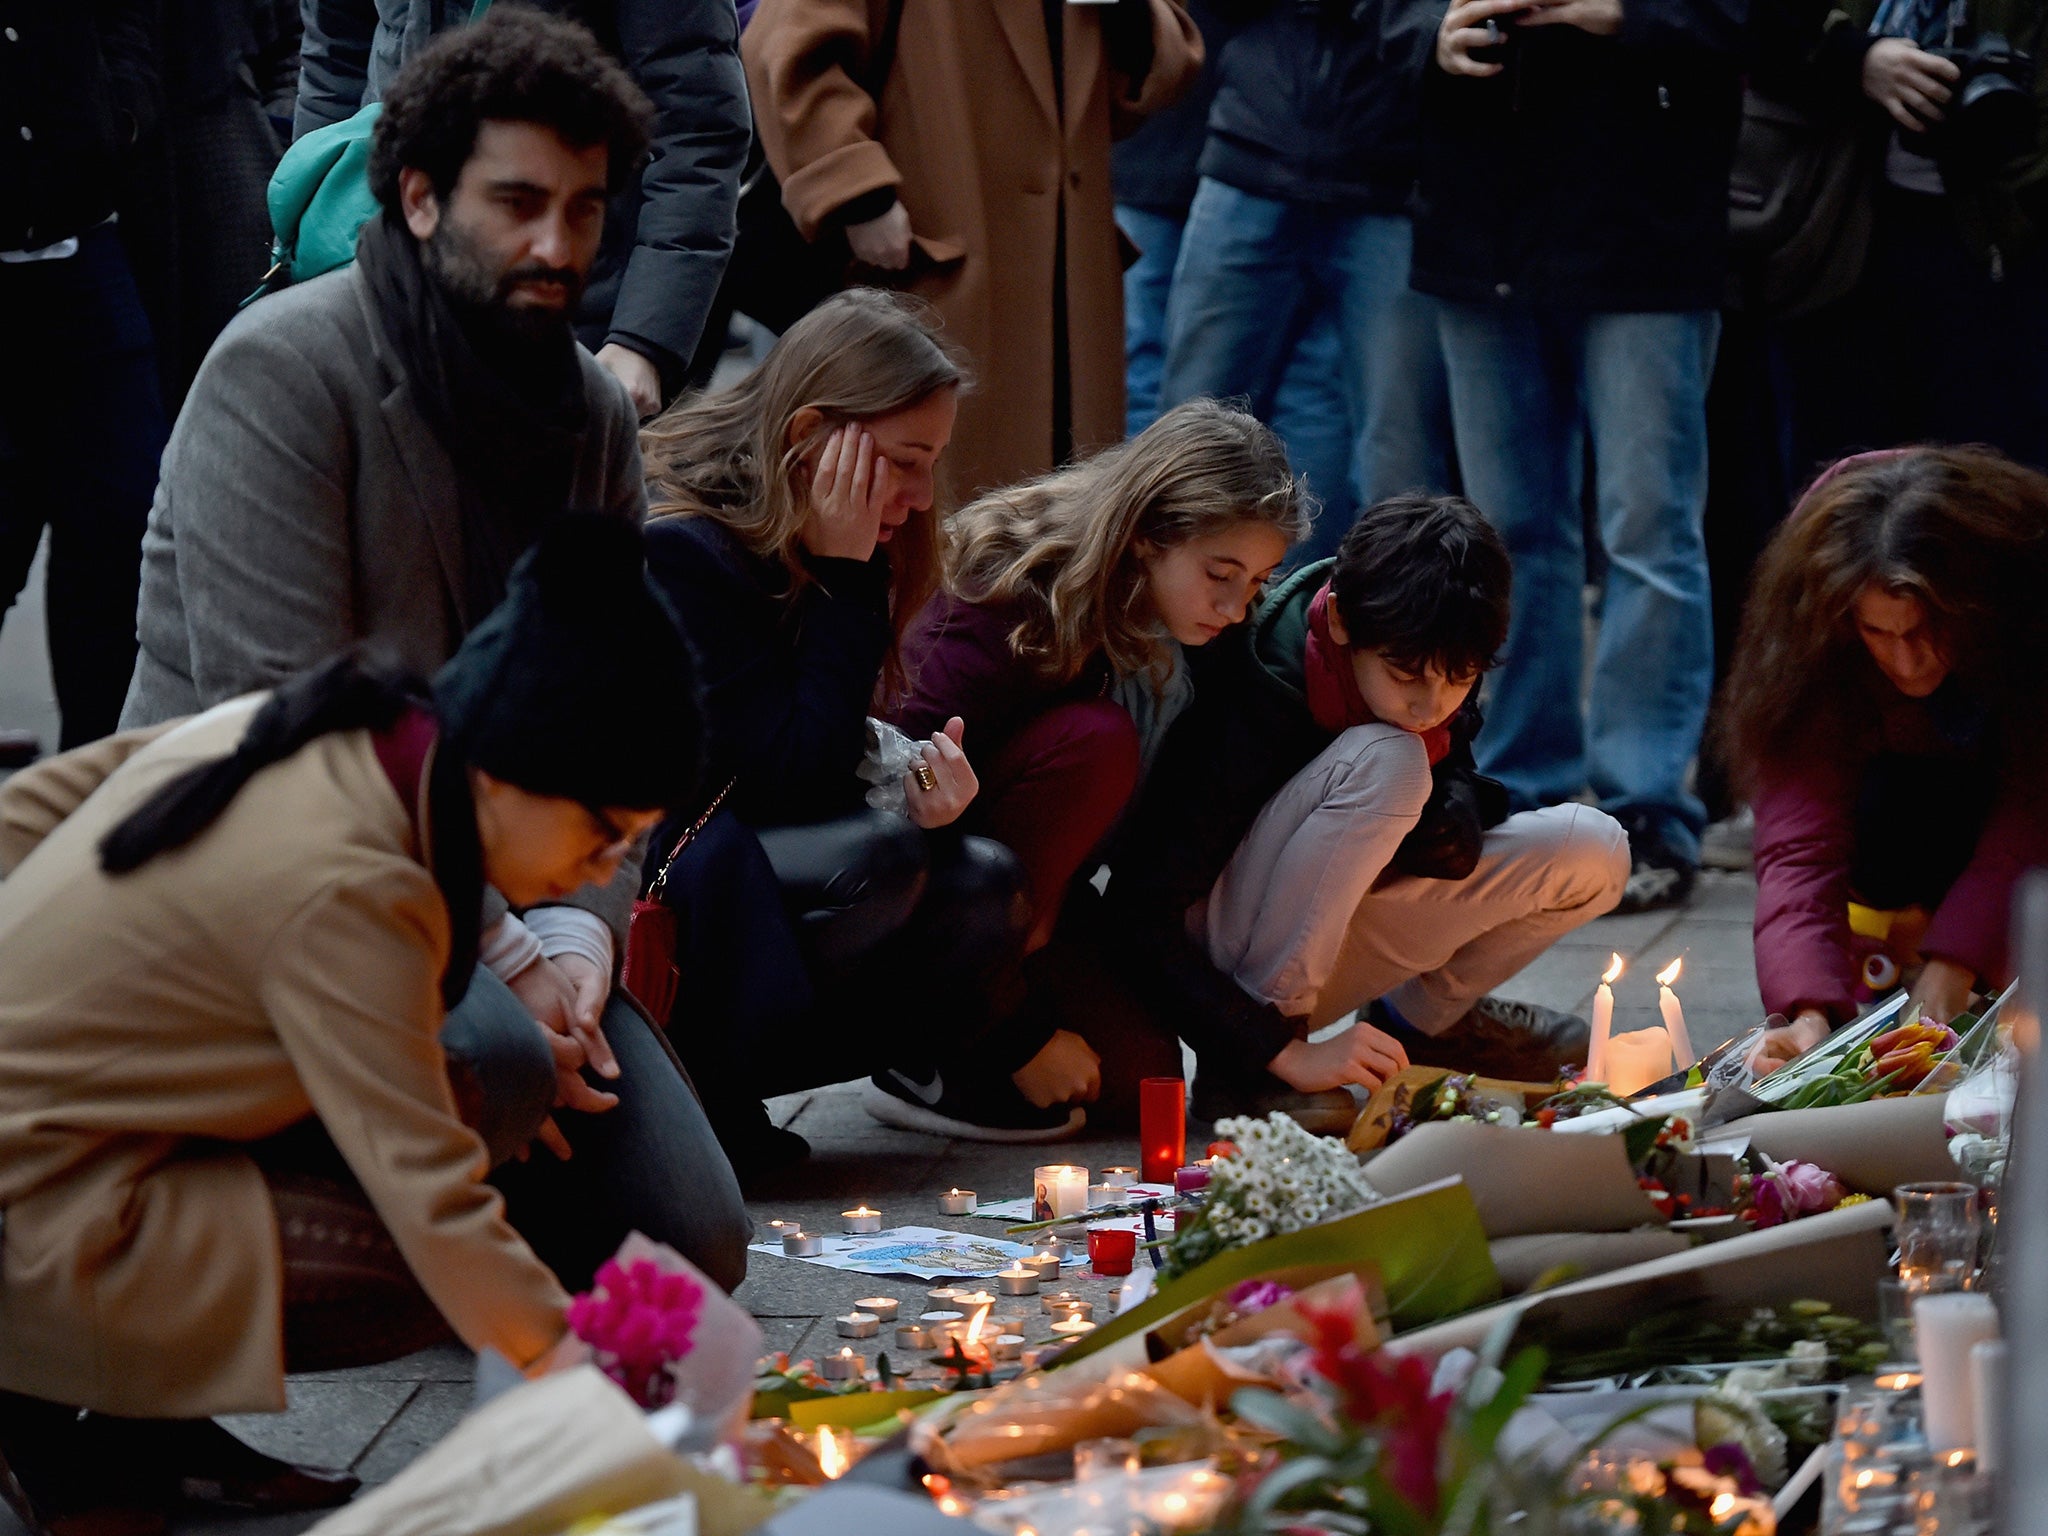 Mourners gather in front of the Petit Cambodge and Le Carillon restaurants on November 14, 2015 in Paris